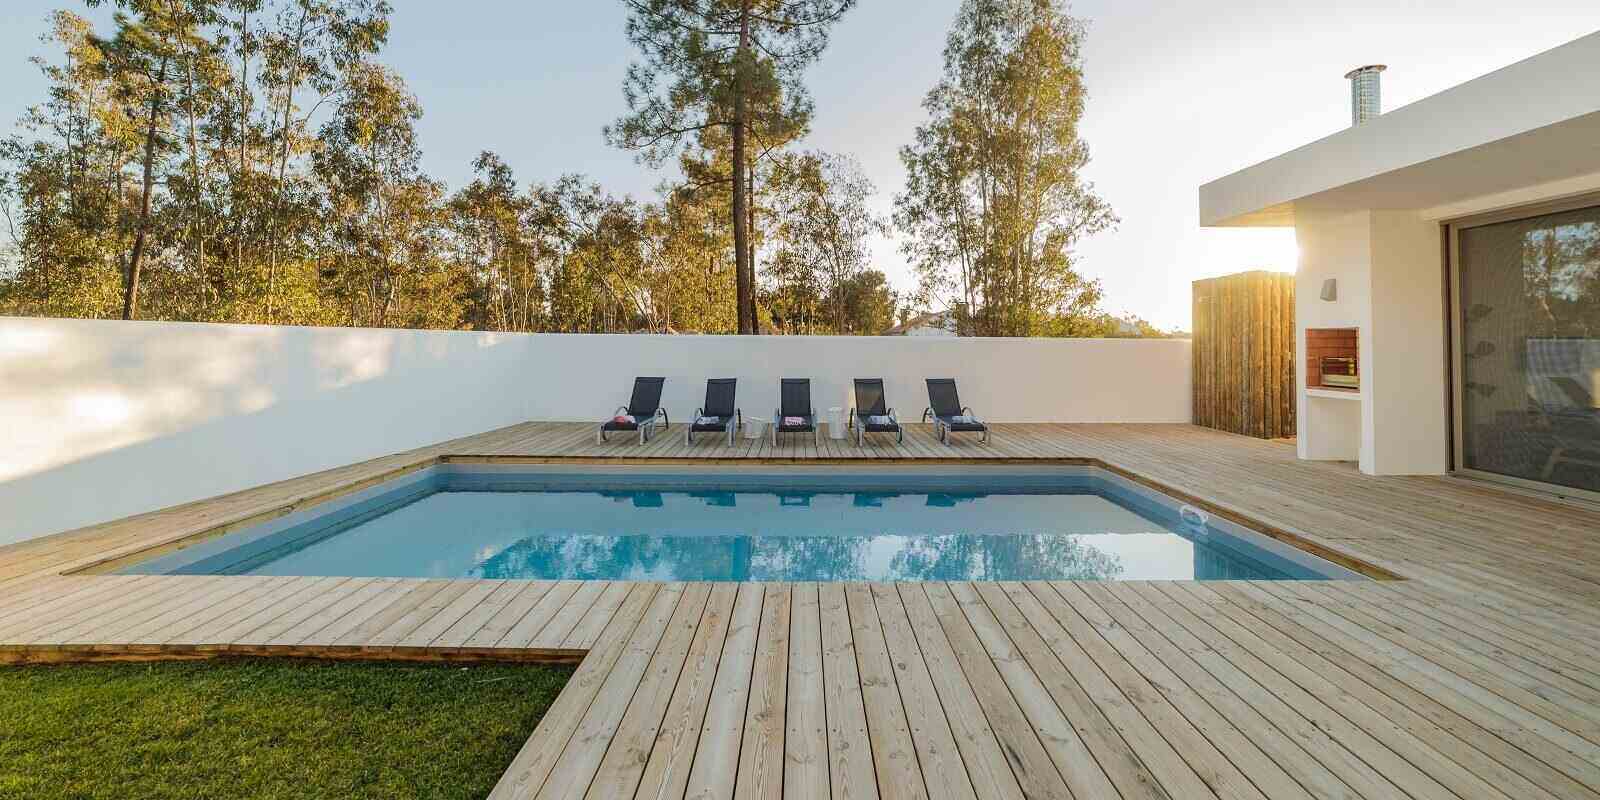 MD house with garden swimming pool and wooden deck